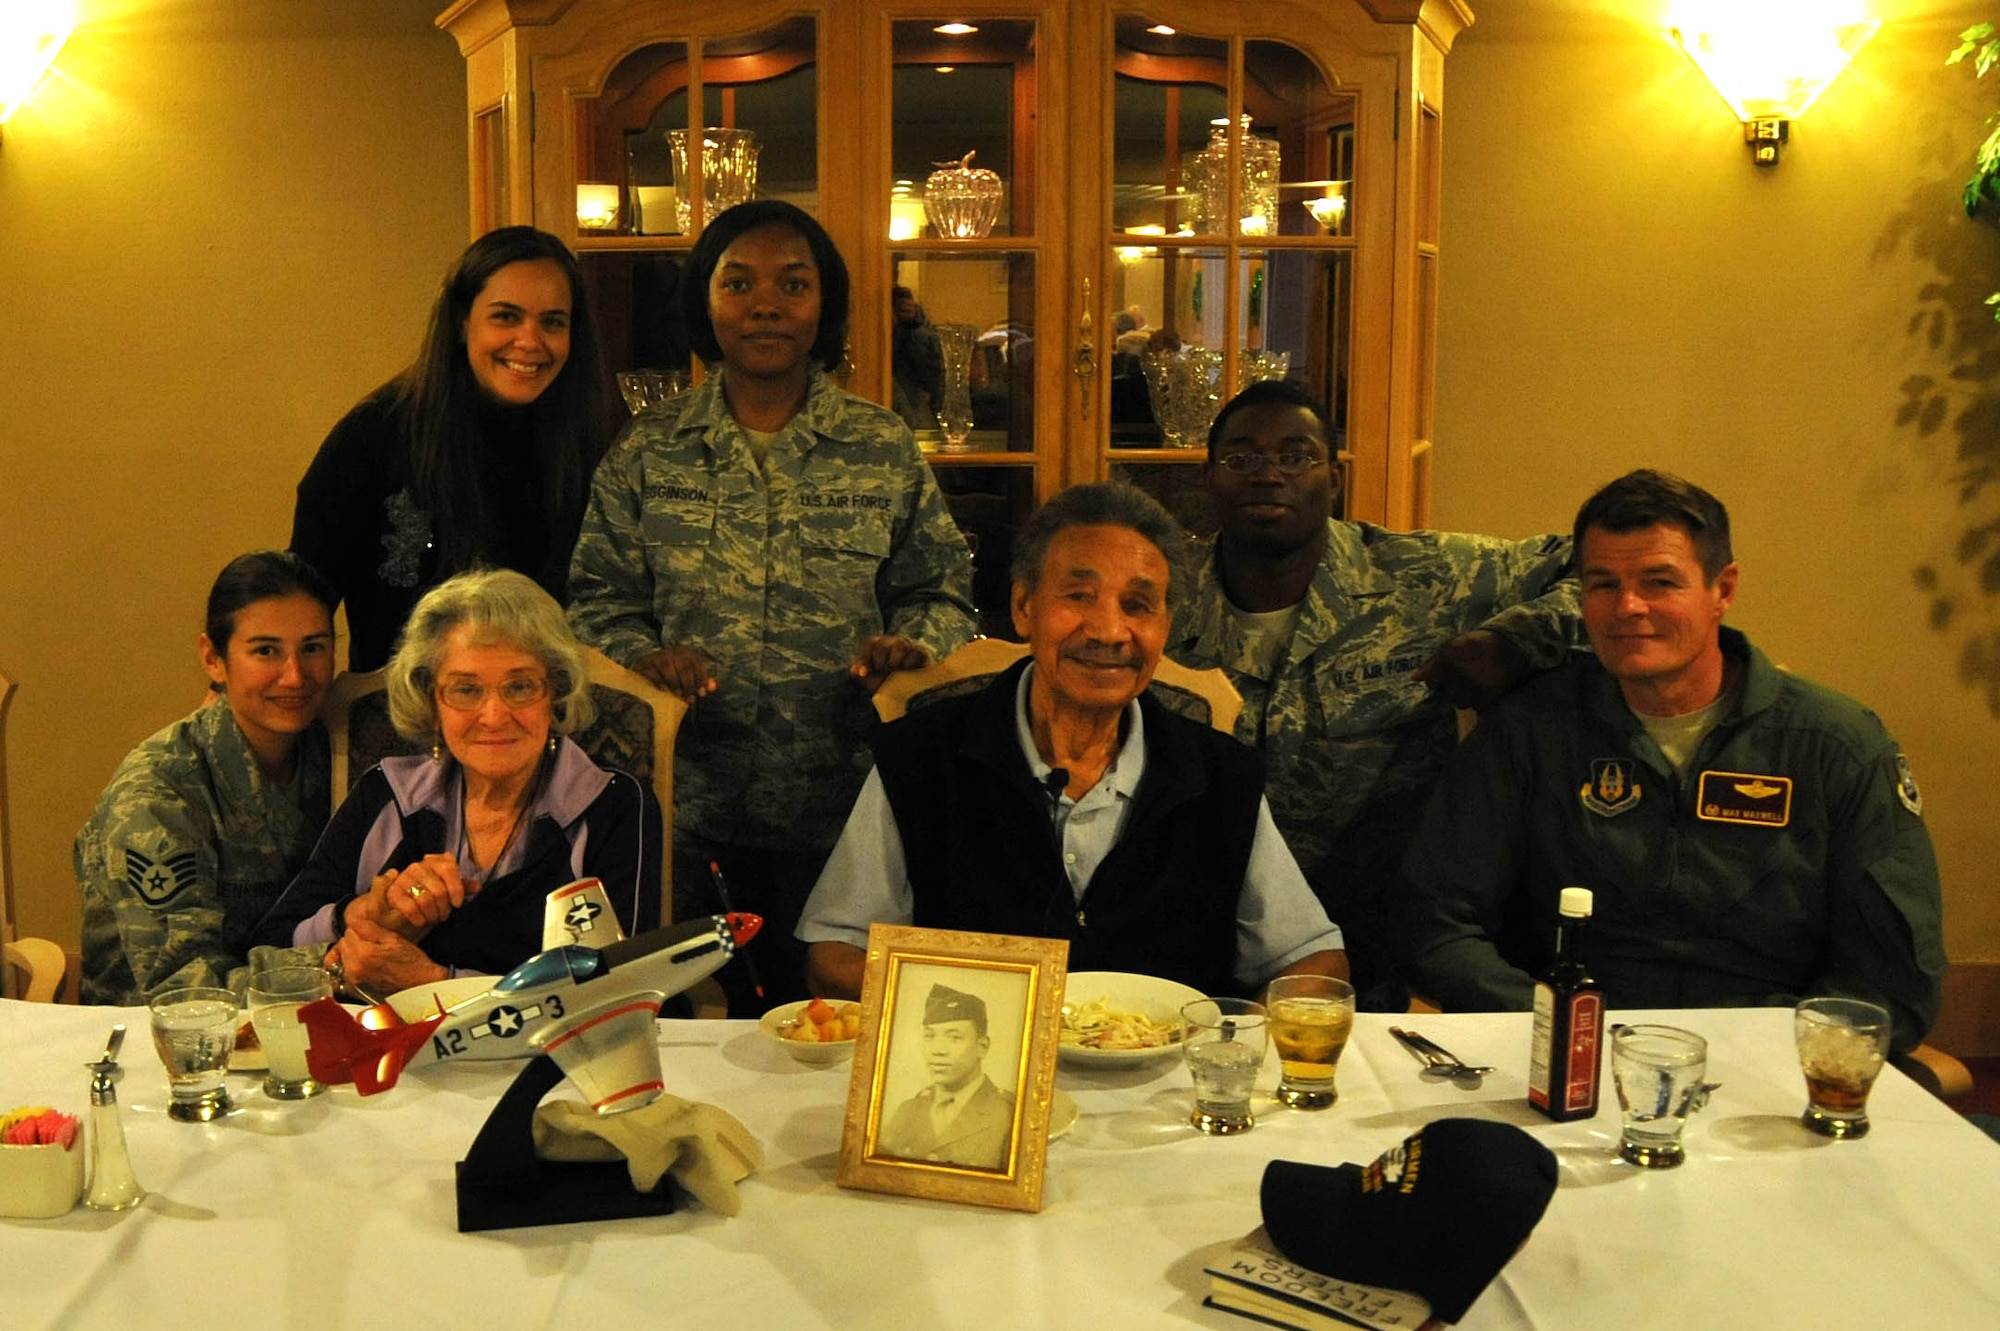 Airmen from the 943rd Rescue Group pose for a photograph with Mr. Ralph Stewart and his wife Rosalyn during a ceremony to honor his service in the U.S. Army Air Corps. Mr. Stewart was a mechanic on the B-25 and B-26 bombers as a Tuskegee Airman. (U.S. Air Force Photo/ Master Sgt. Luke Johnson)